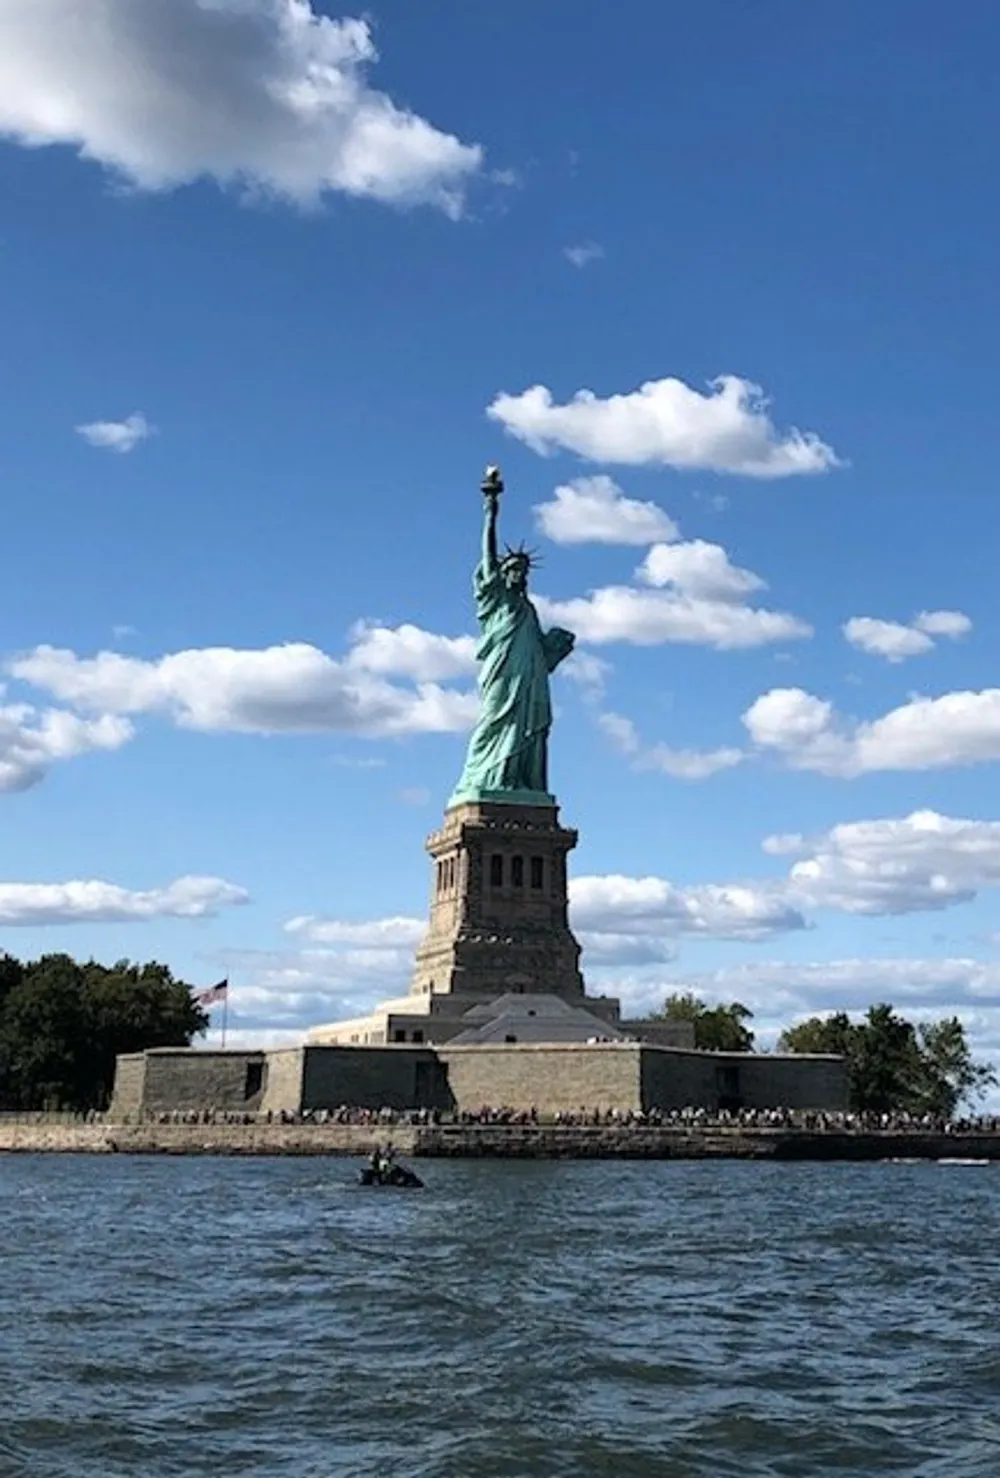 The image features the Statue of Liberty under a partly cloudy sky with views of the water in the foreground